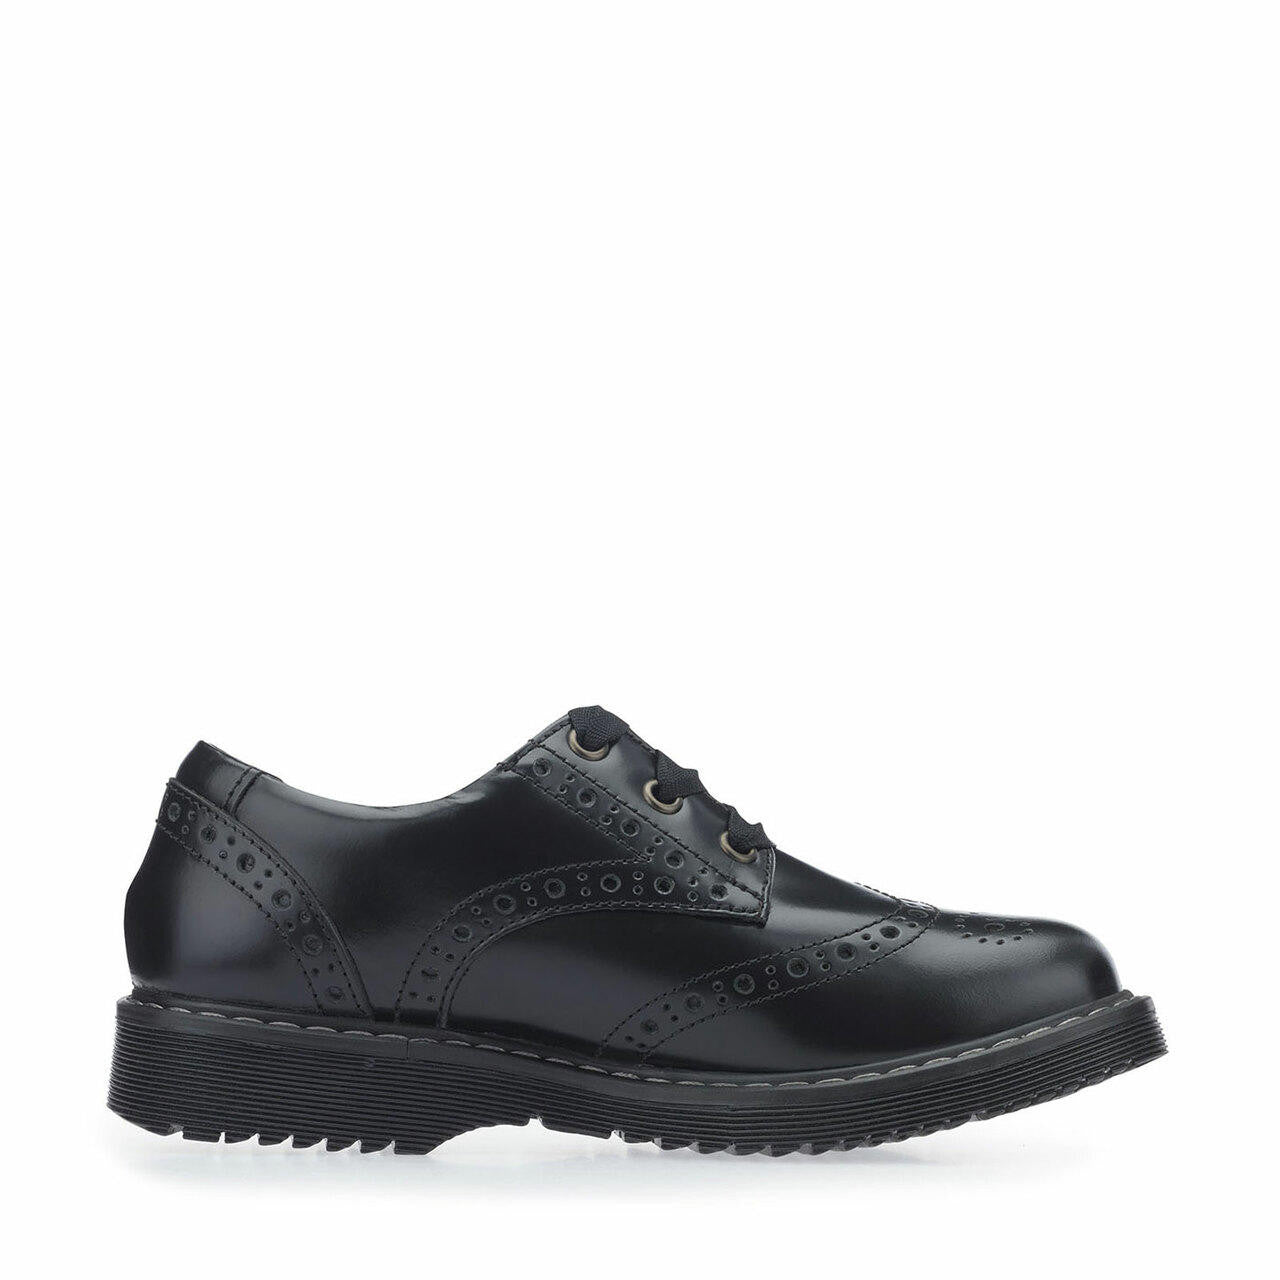 A Start-Rite school shoe,style Impulsive, in black leather with lace up fastening. Right side view.